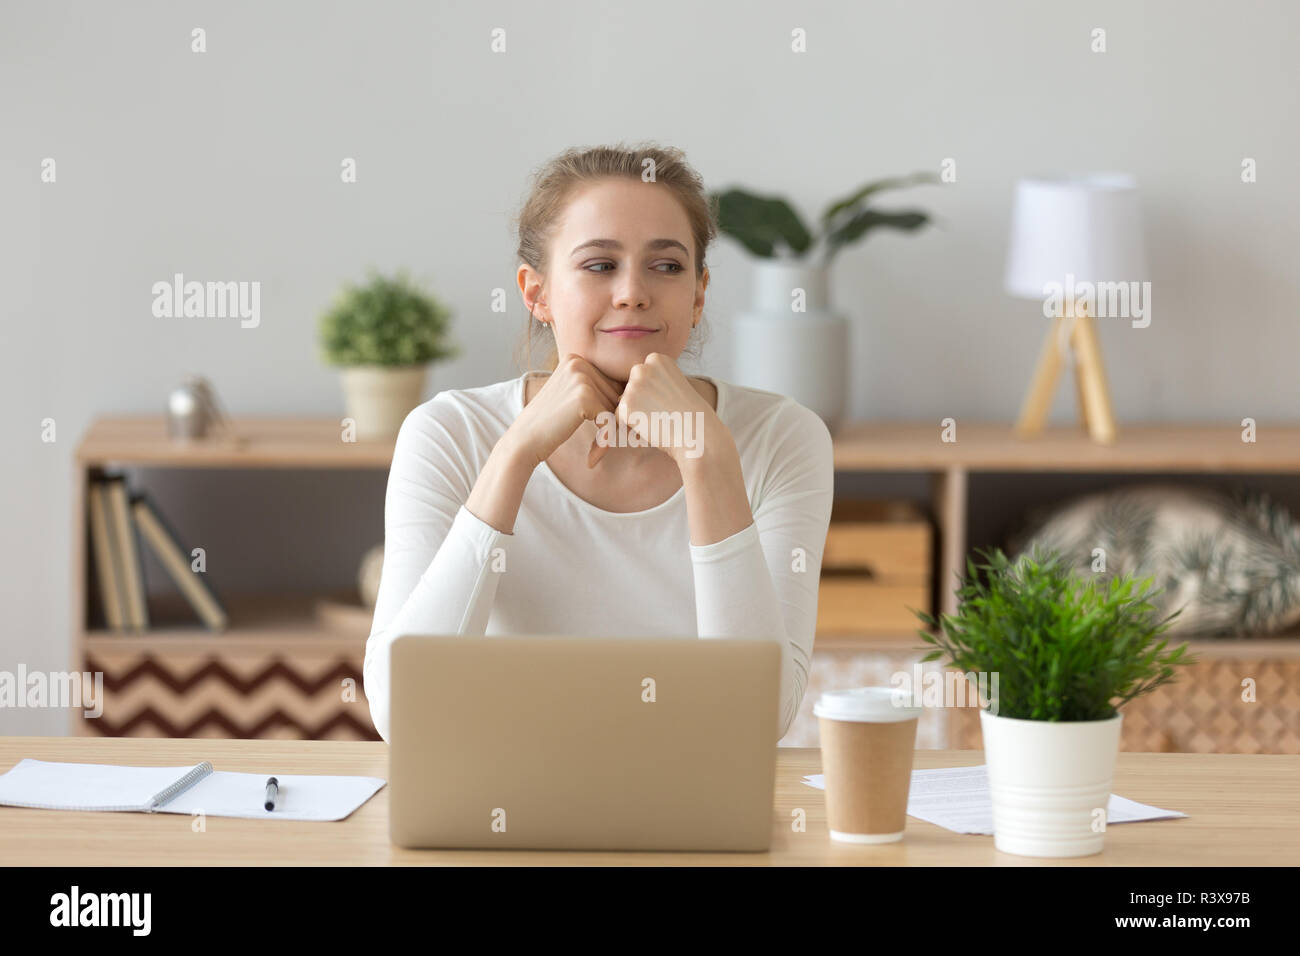 Dreamy girl looking aside thinking of future success Stock Photo